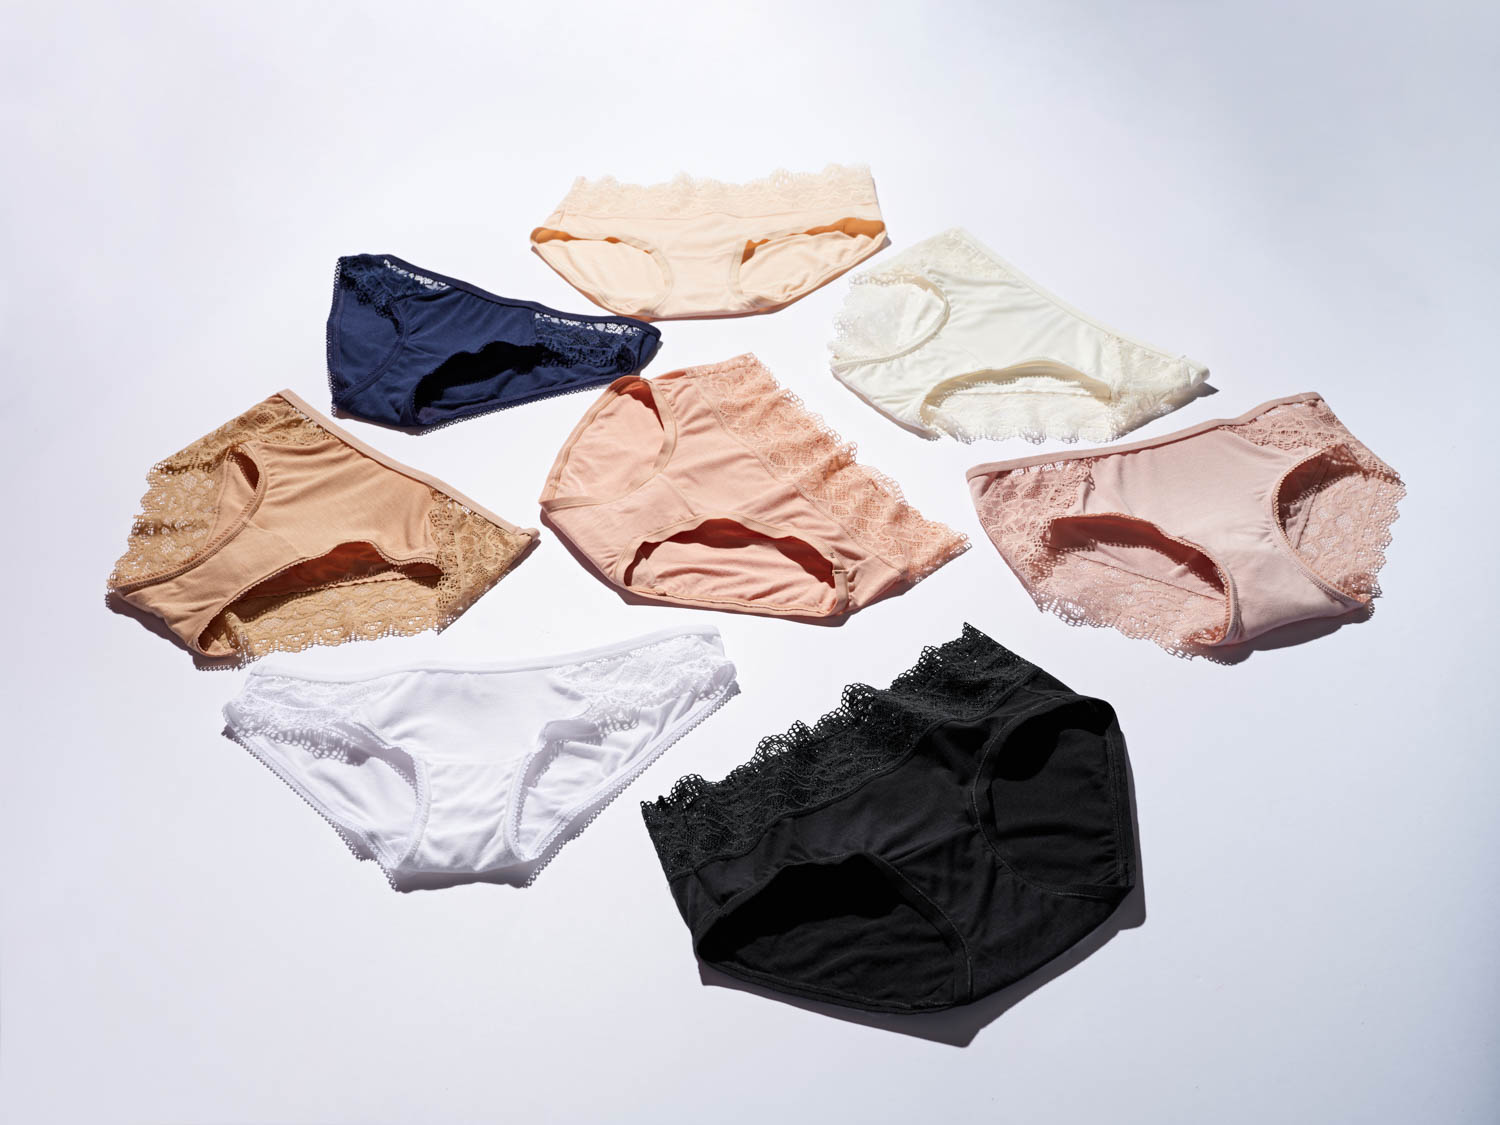 The Real Reason Women Have Underwear Pockets - Forgot To Think